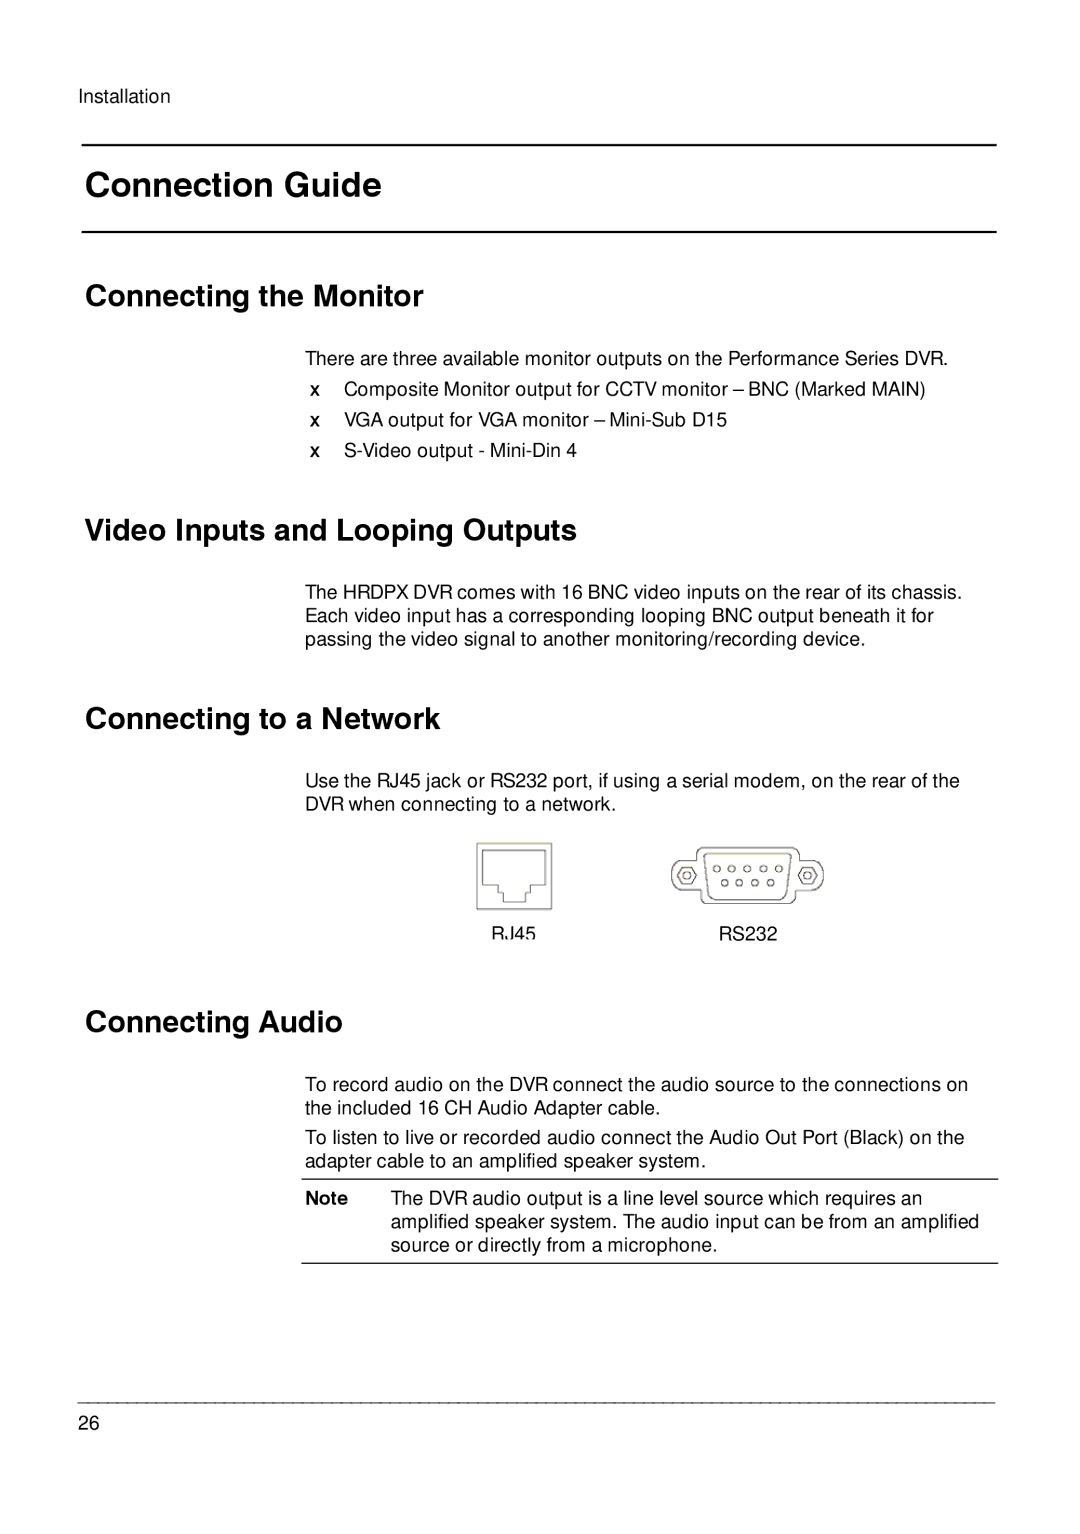 Honeywell HRDPX manual Connection Guide, Connecting the Monitor, Video Inputs and Looping Outputs, Connecting to a Network 